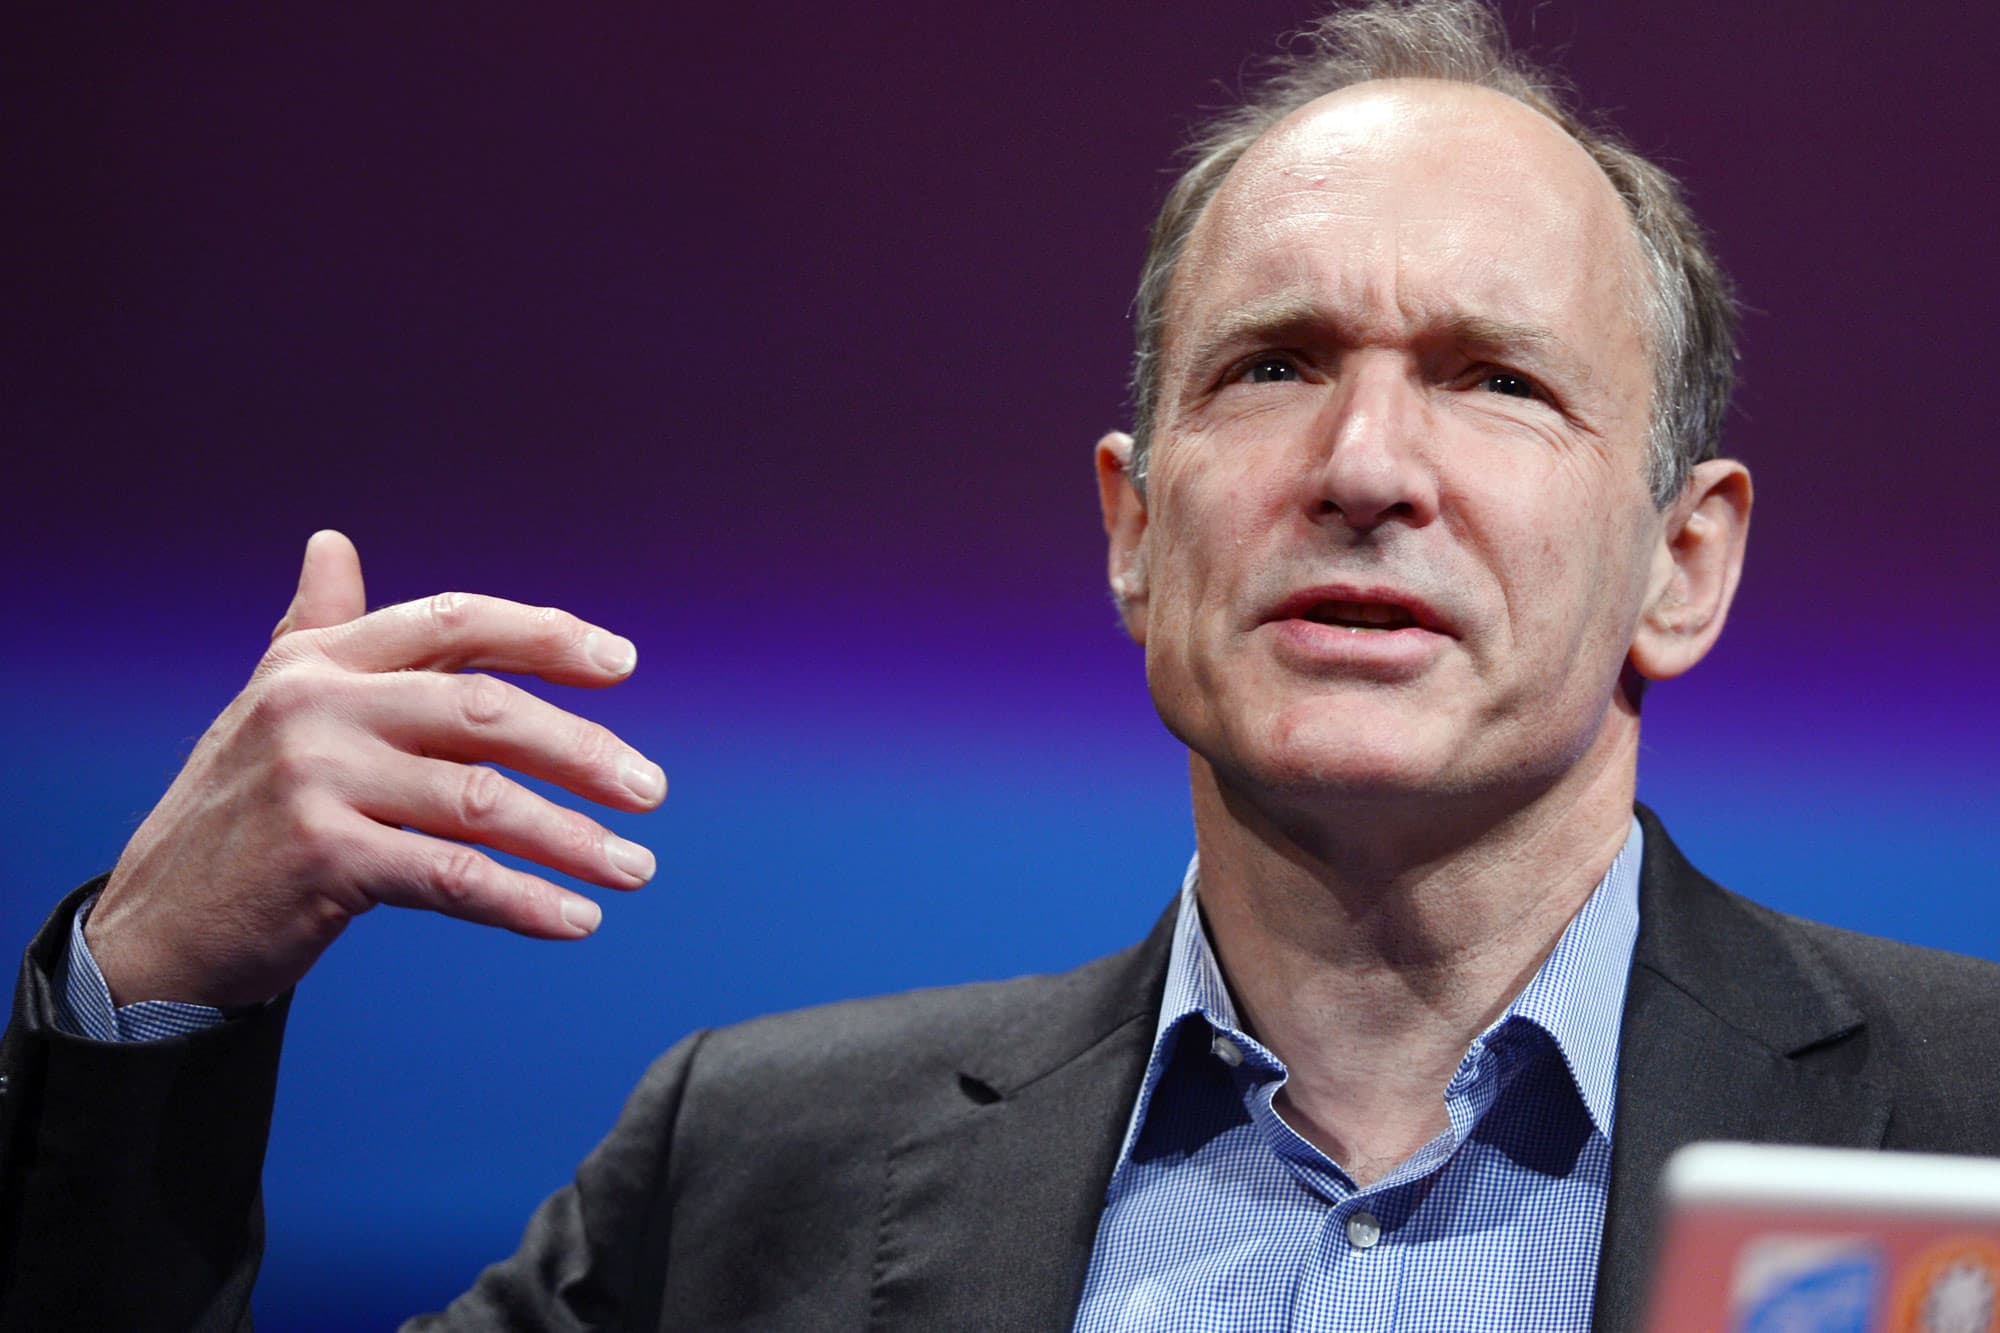 Tim Berners-Lee, web inventor: internet is at 'tipping point'